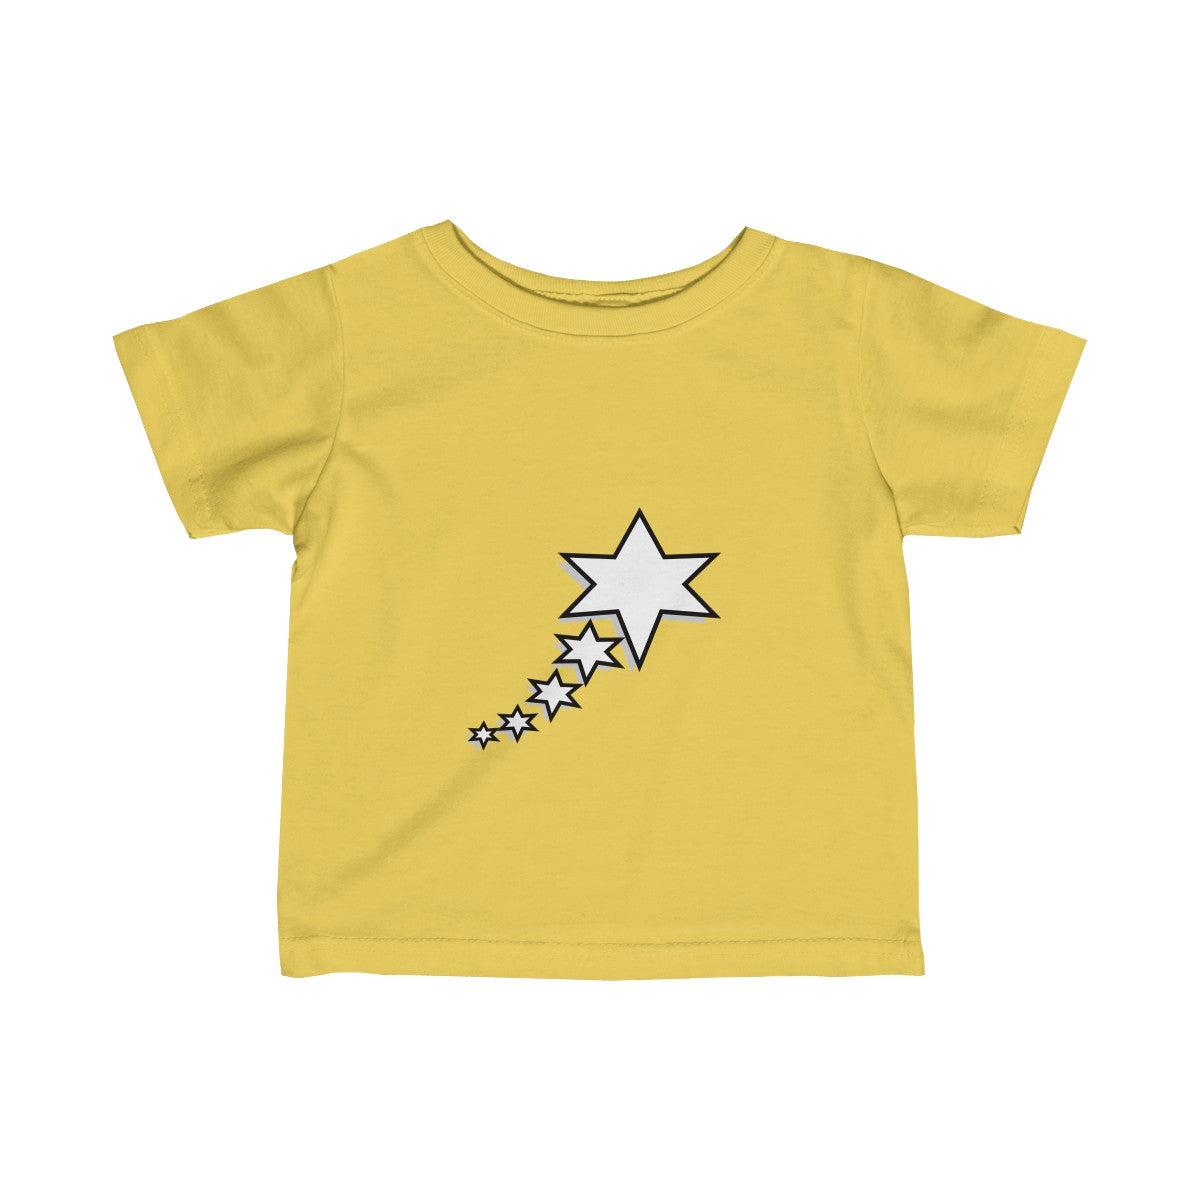 Infant Fine Jersey Tee - 6 Points 5 Stars (White)